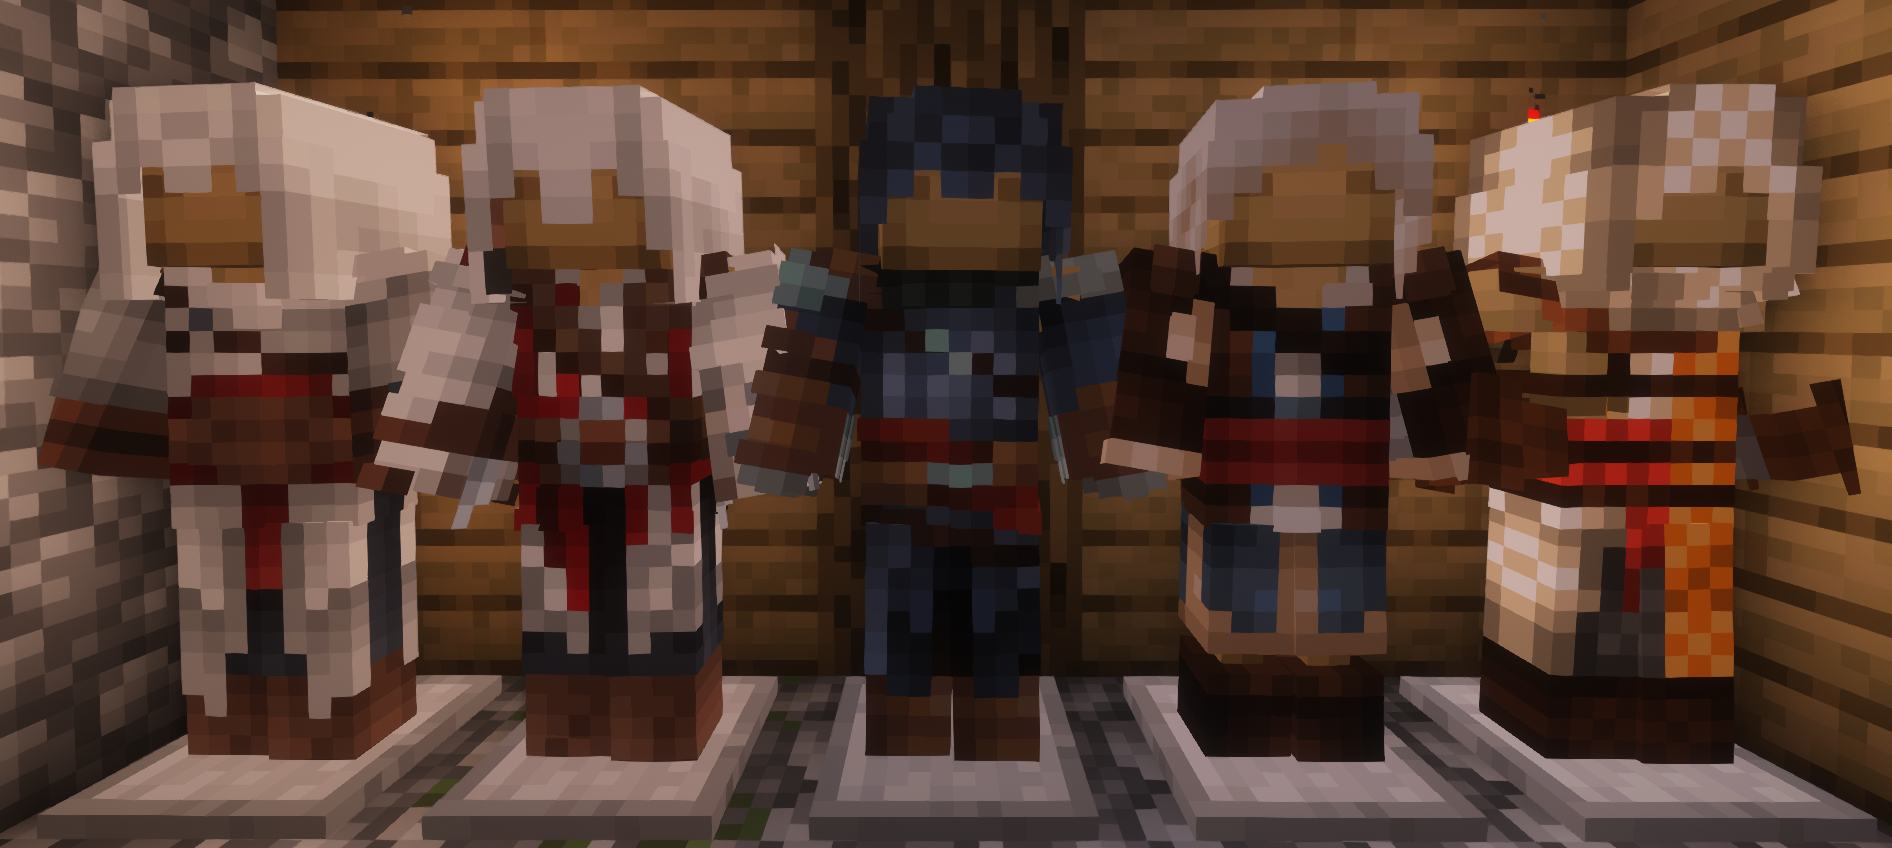 An epic fusion of two iconic worlds! These Assassin's Creed outfits bring the allure and mystique of the assassins into the blocky realm of Minecraft. Gear up to explore the blocks with style and agility!